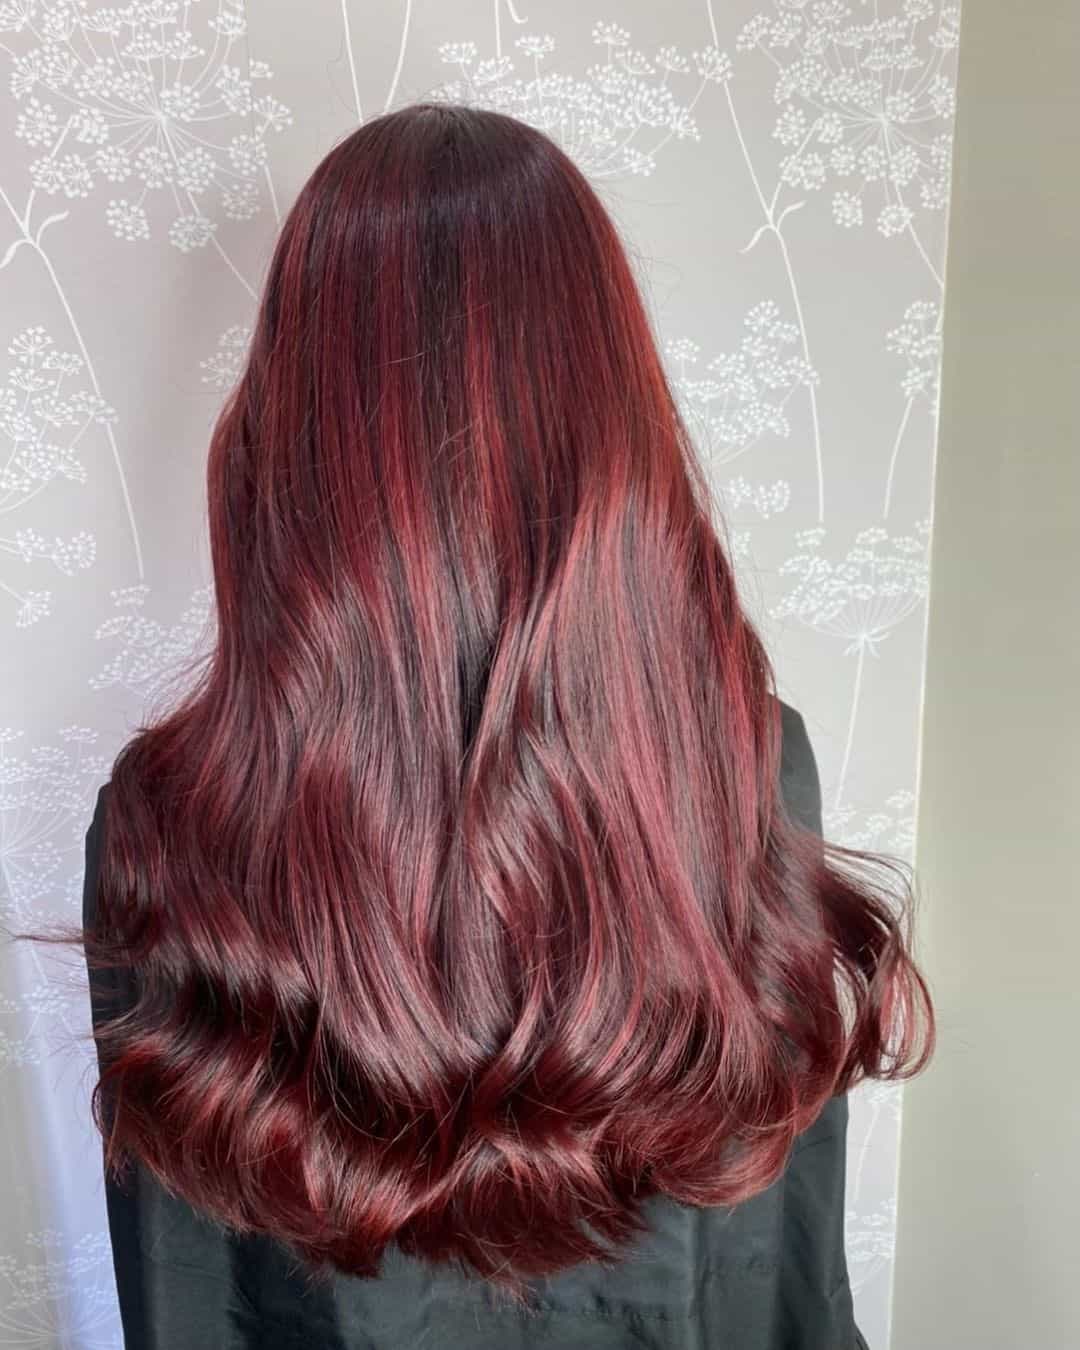 Fiery Red Highlights On Black Hair Design 